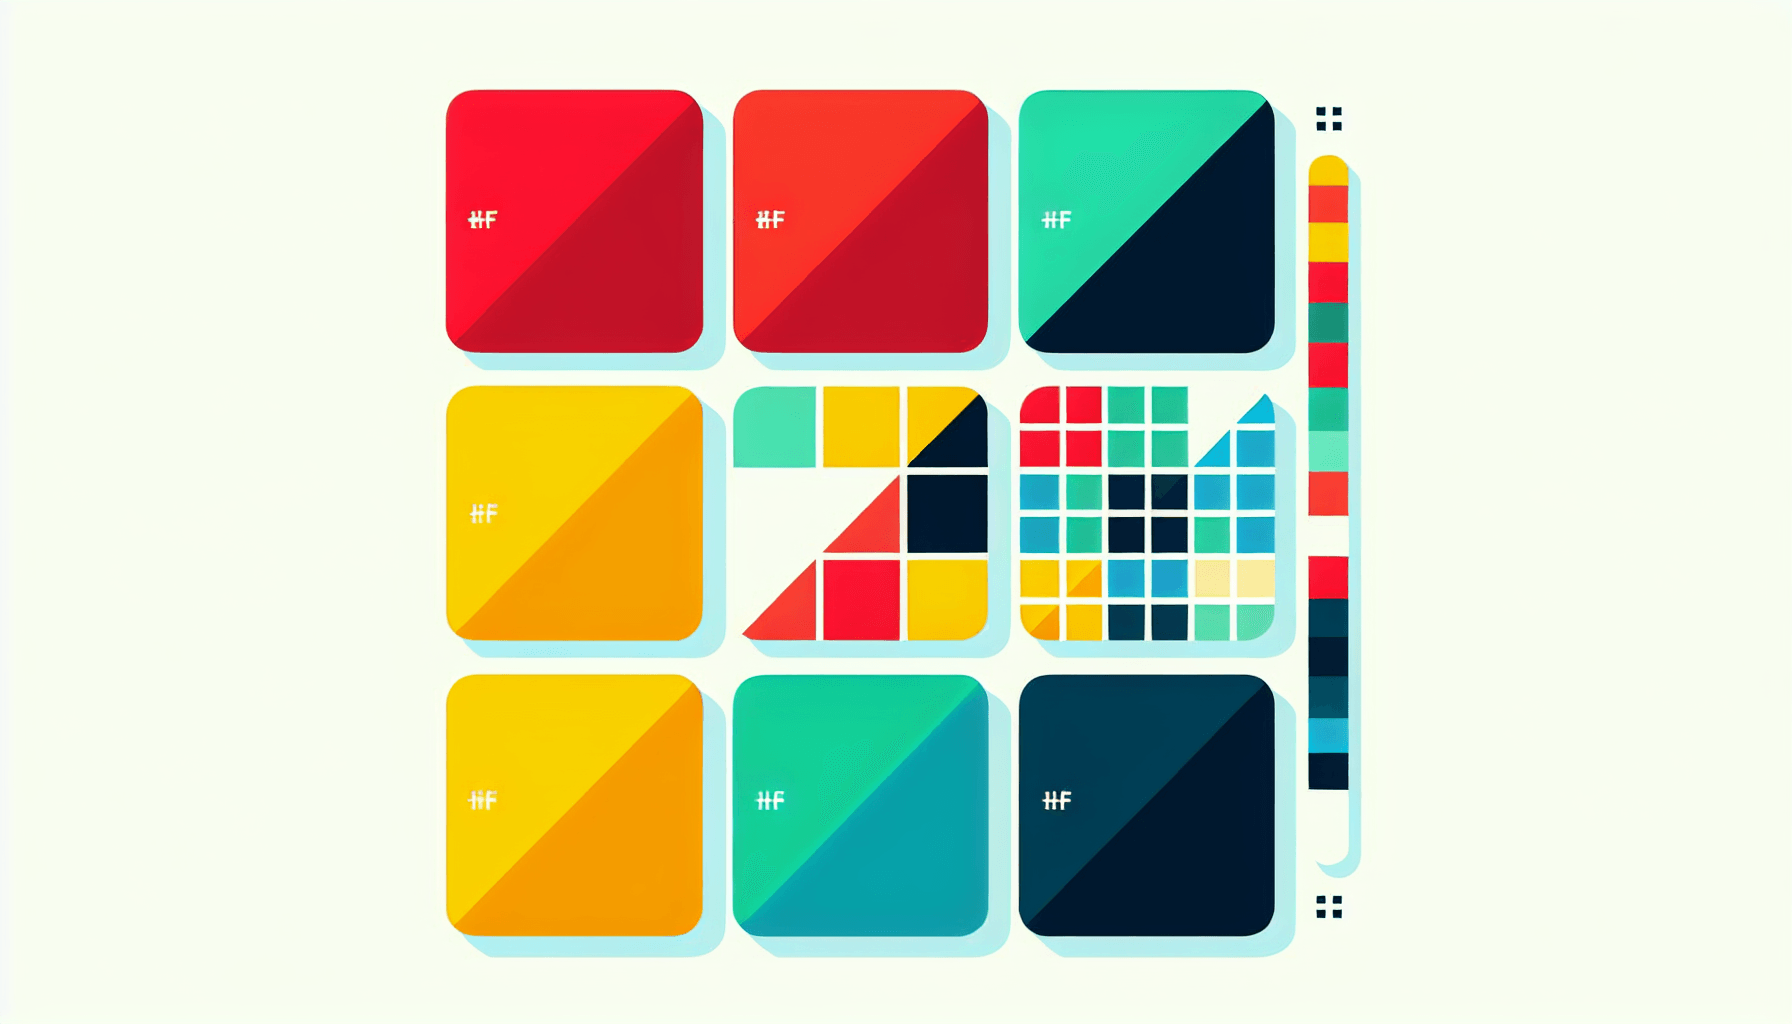 Filter in flat illustration style and white background, red #f47574, green #88c7a8, yellow #fcc44b, and blue #645bc8 colors.